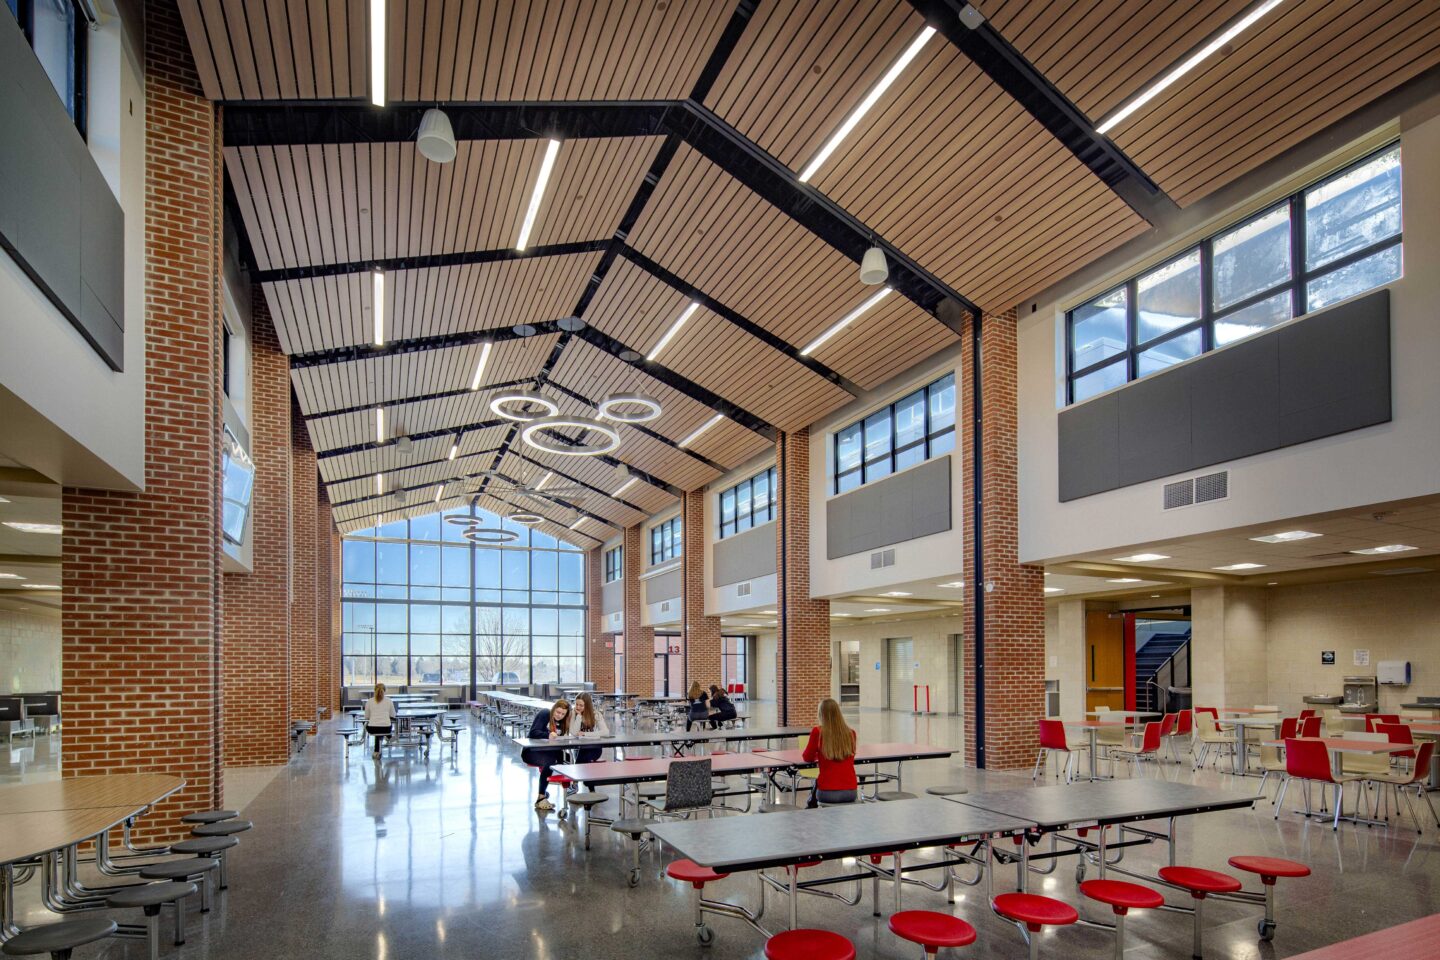 The large cafeteria features clerestory windows and is anchored by floor-to-ceiling windows